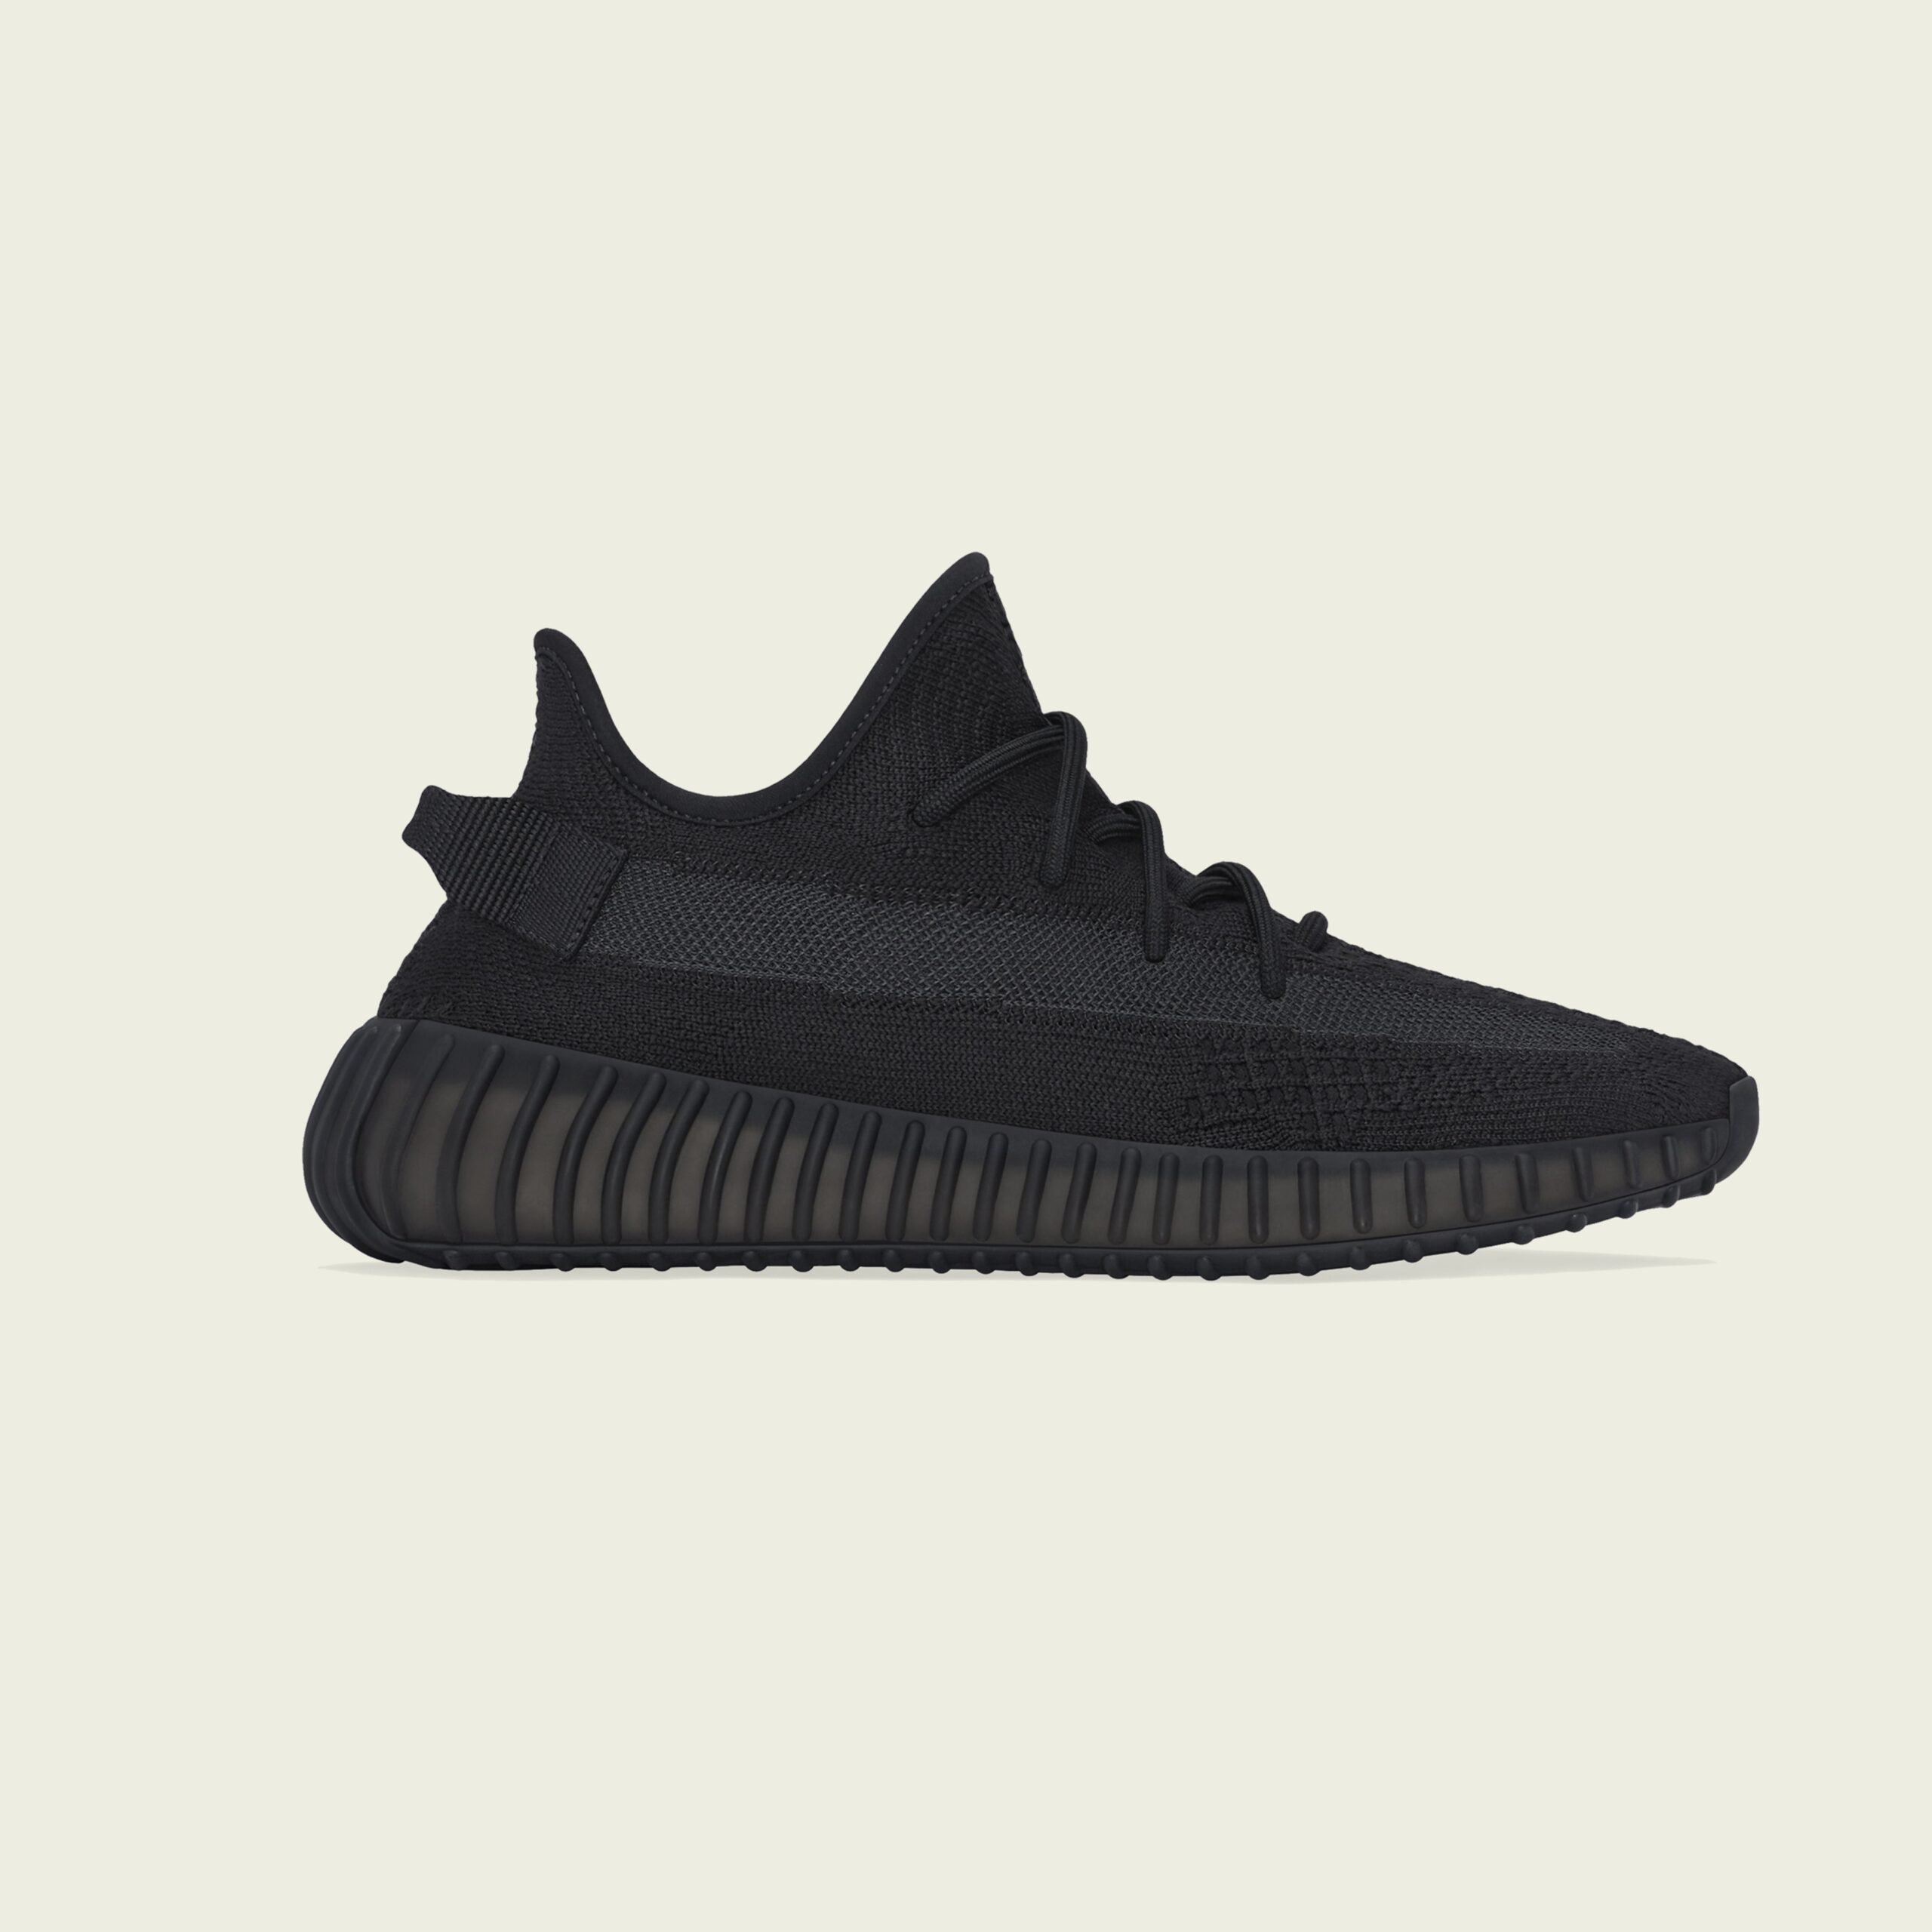 Adidas Yeezy Boost 350 V2 “Onyx” Release Date